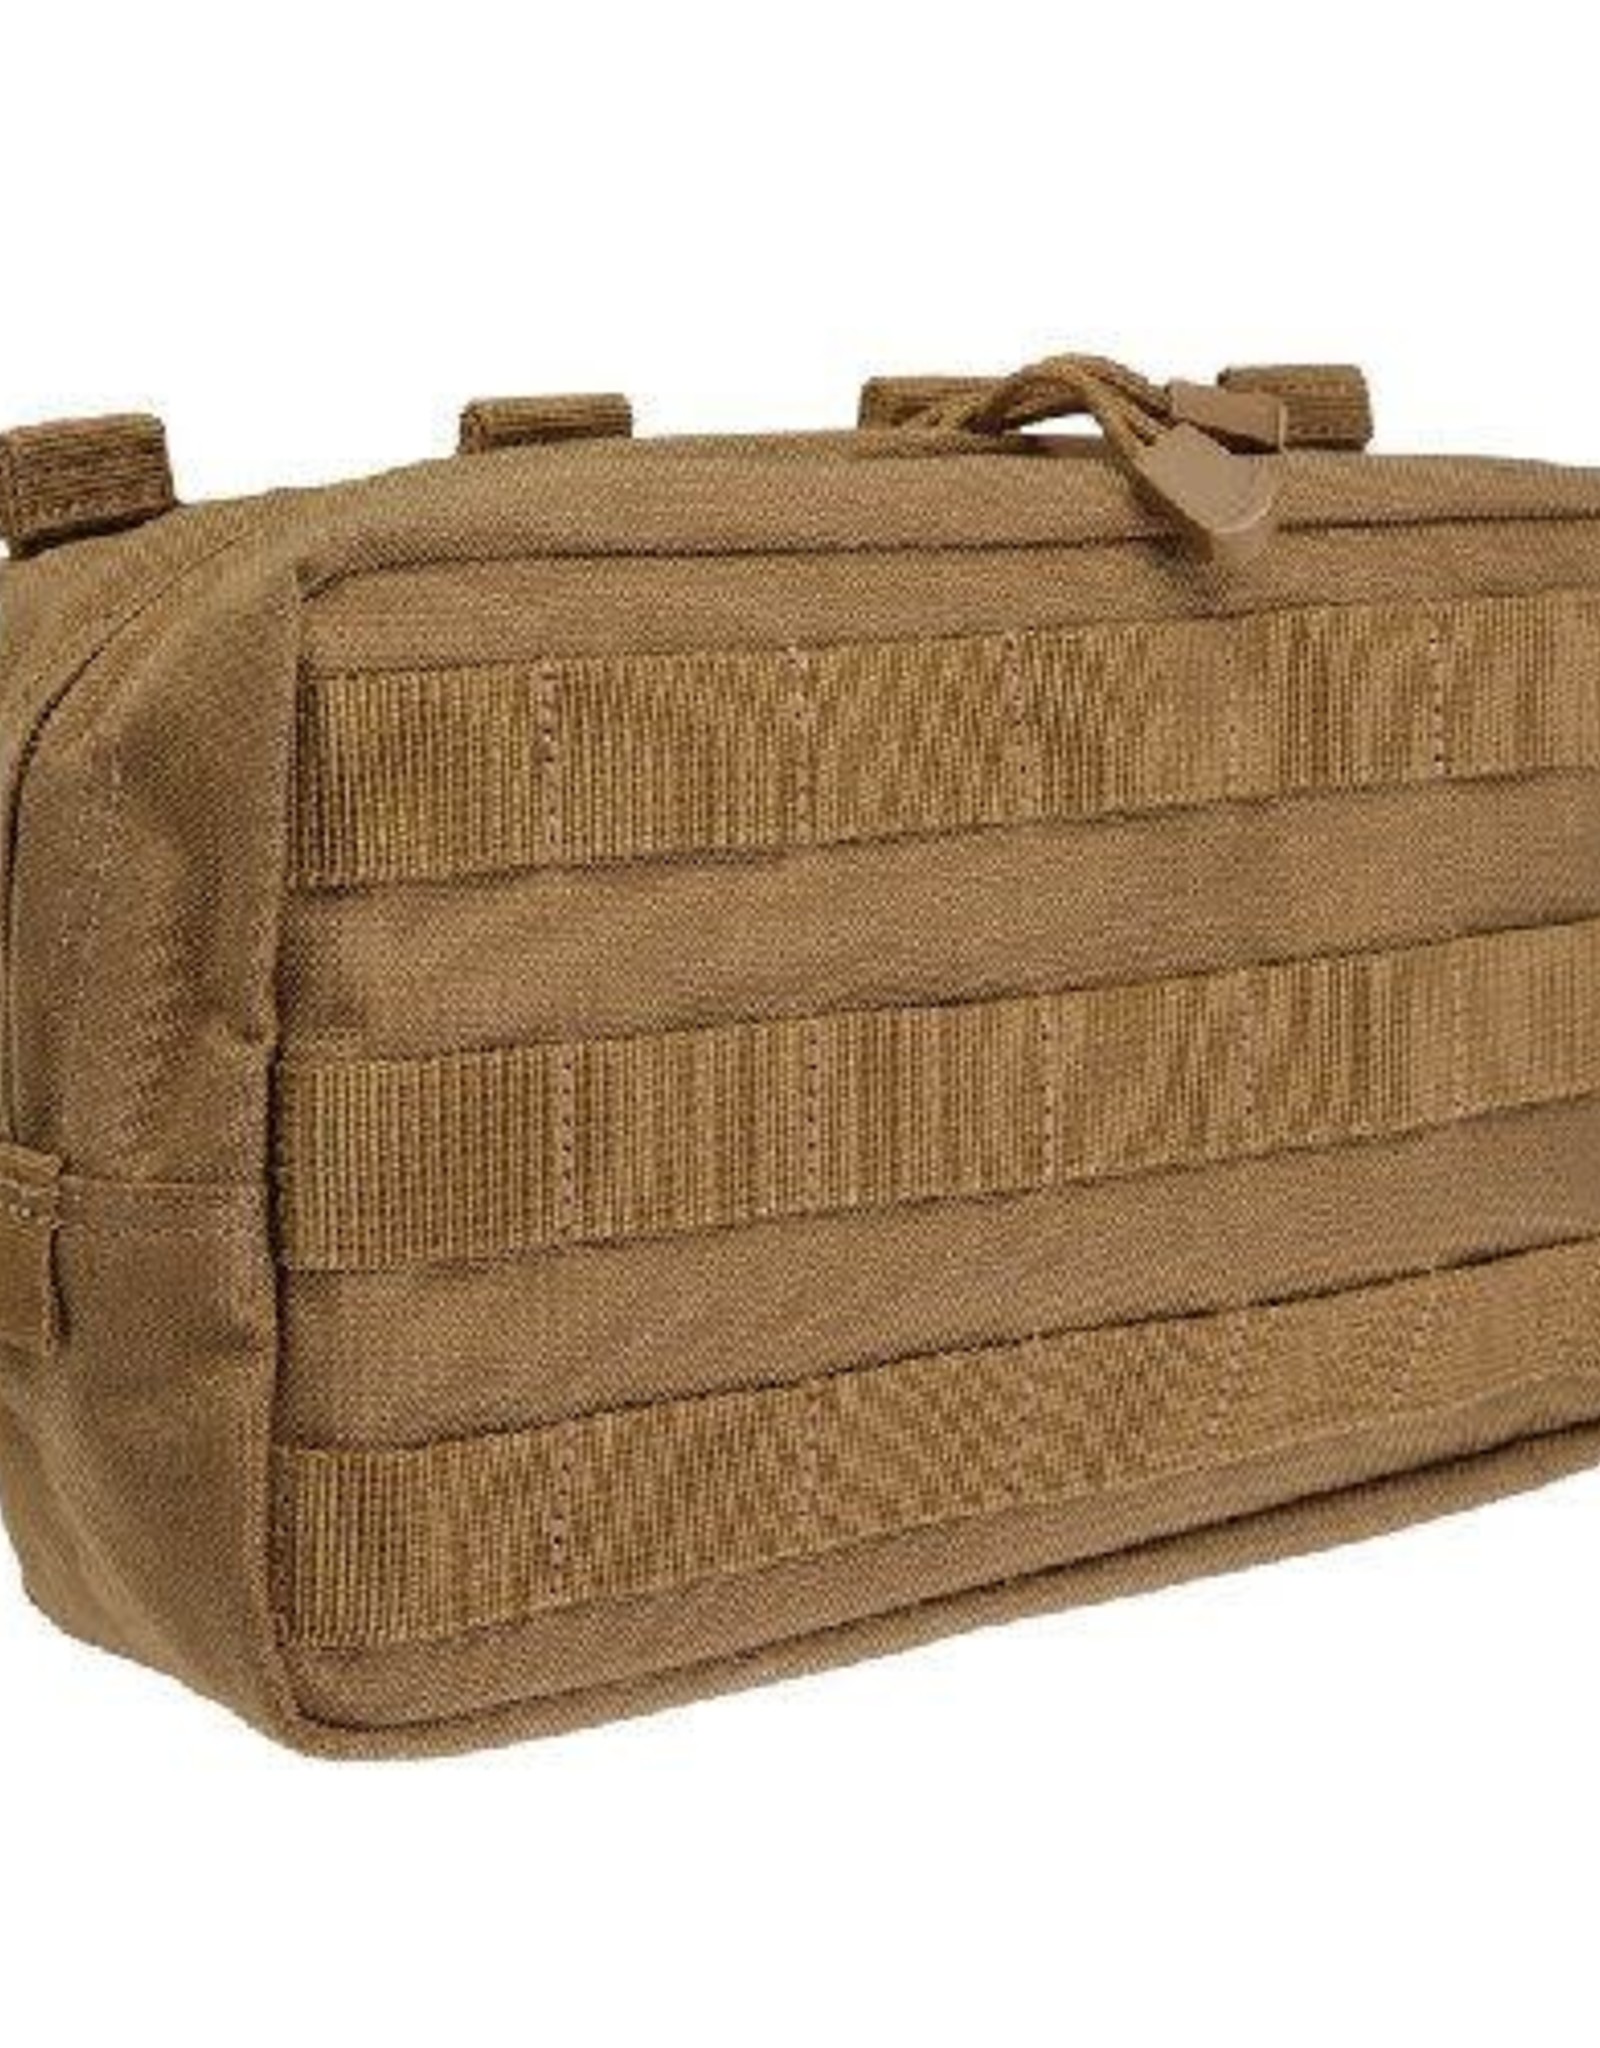 5.11 Tactical 10.6 Pouch